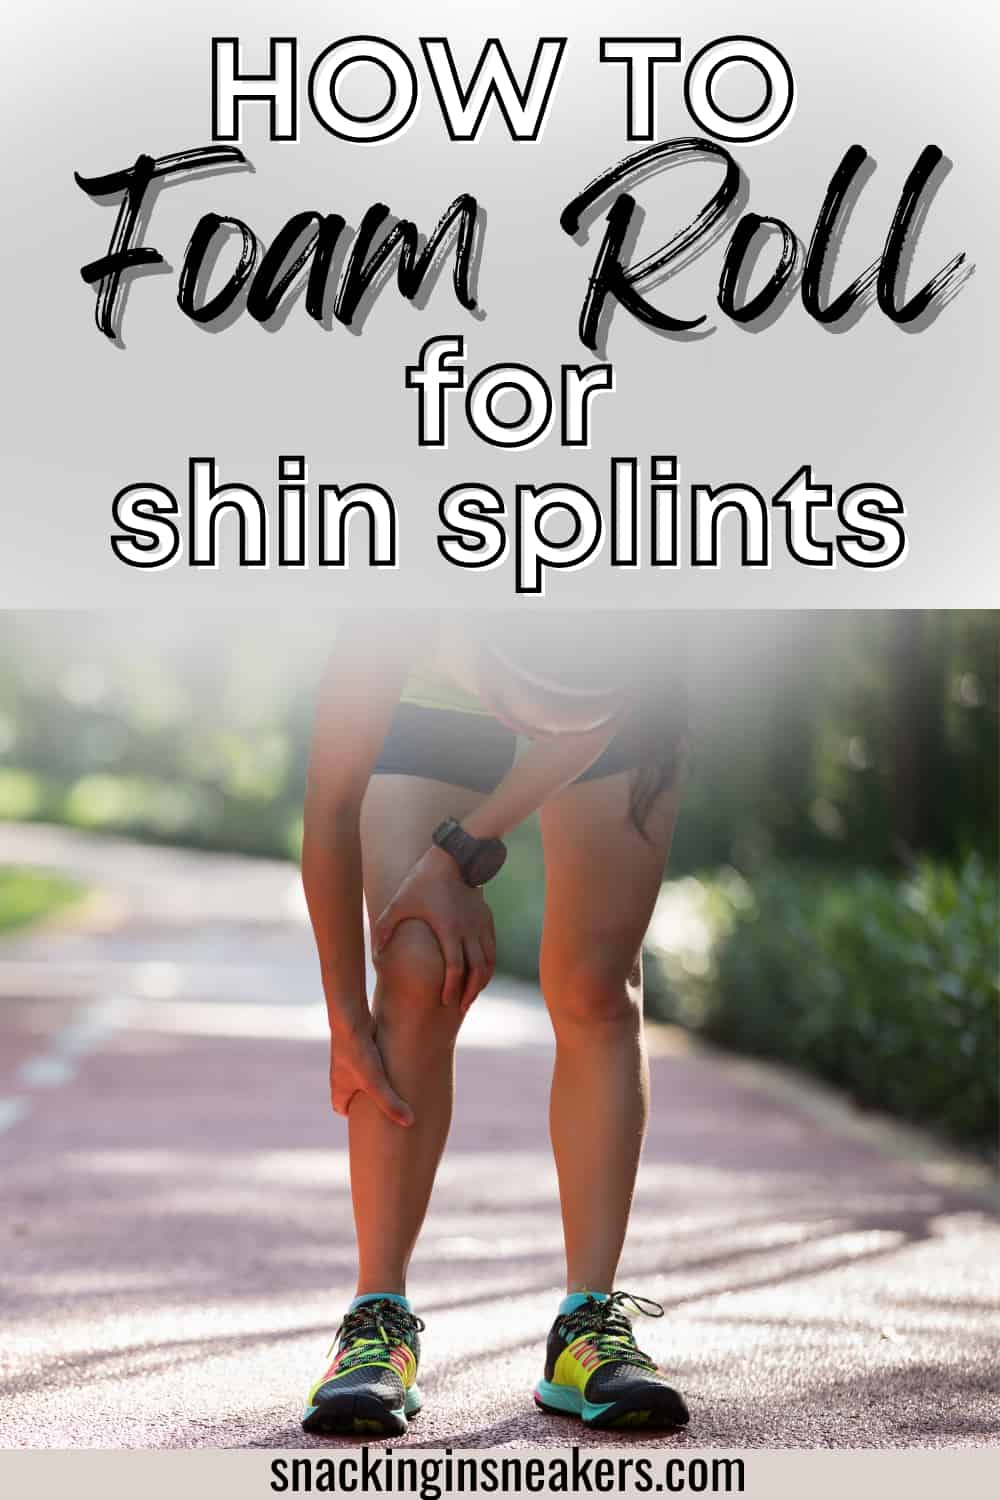 A runner holding her leg due to shin splints, with a text overlay that says how to foam roll for shin splints.